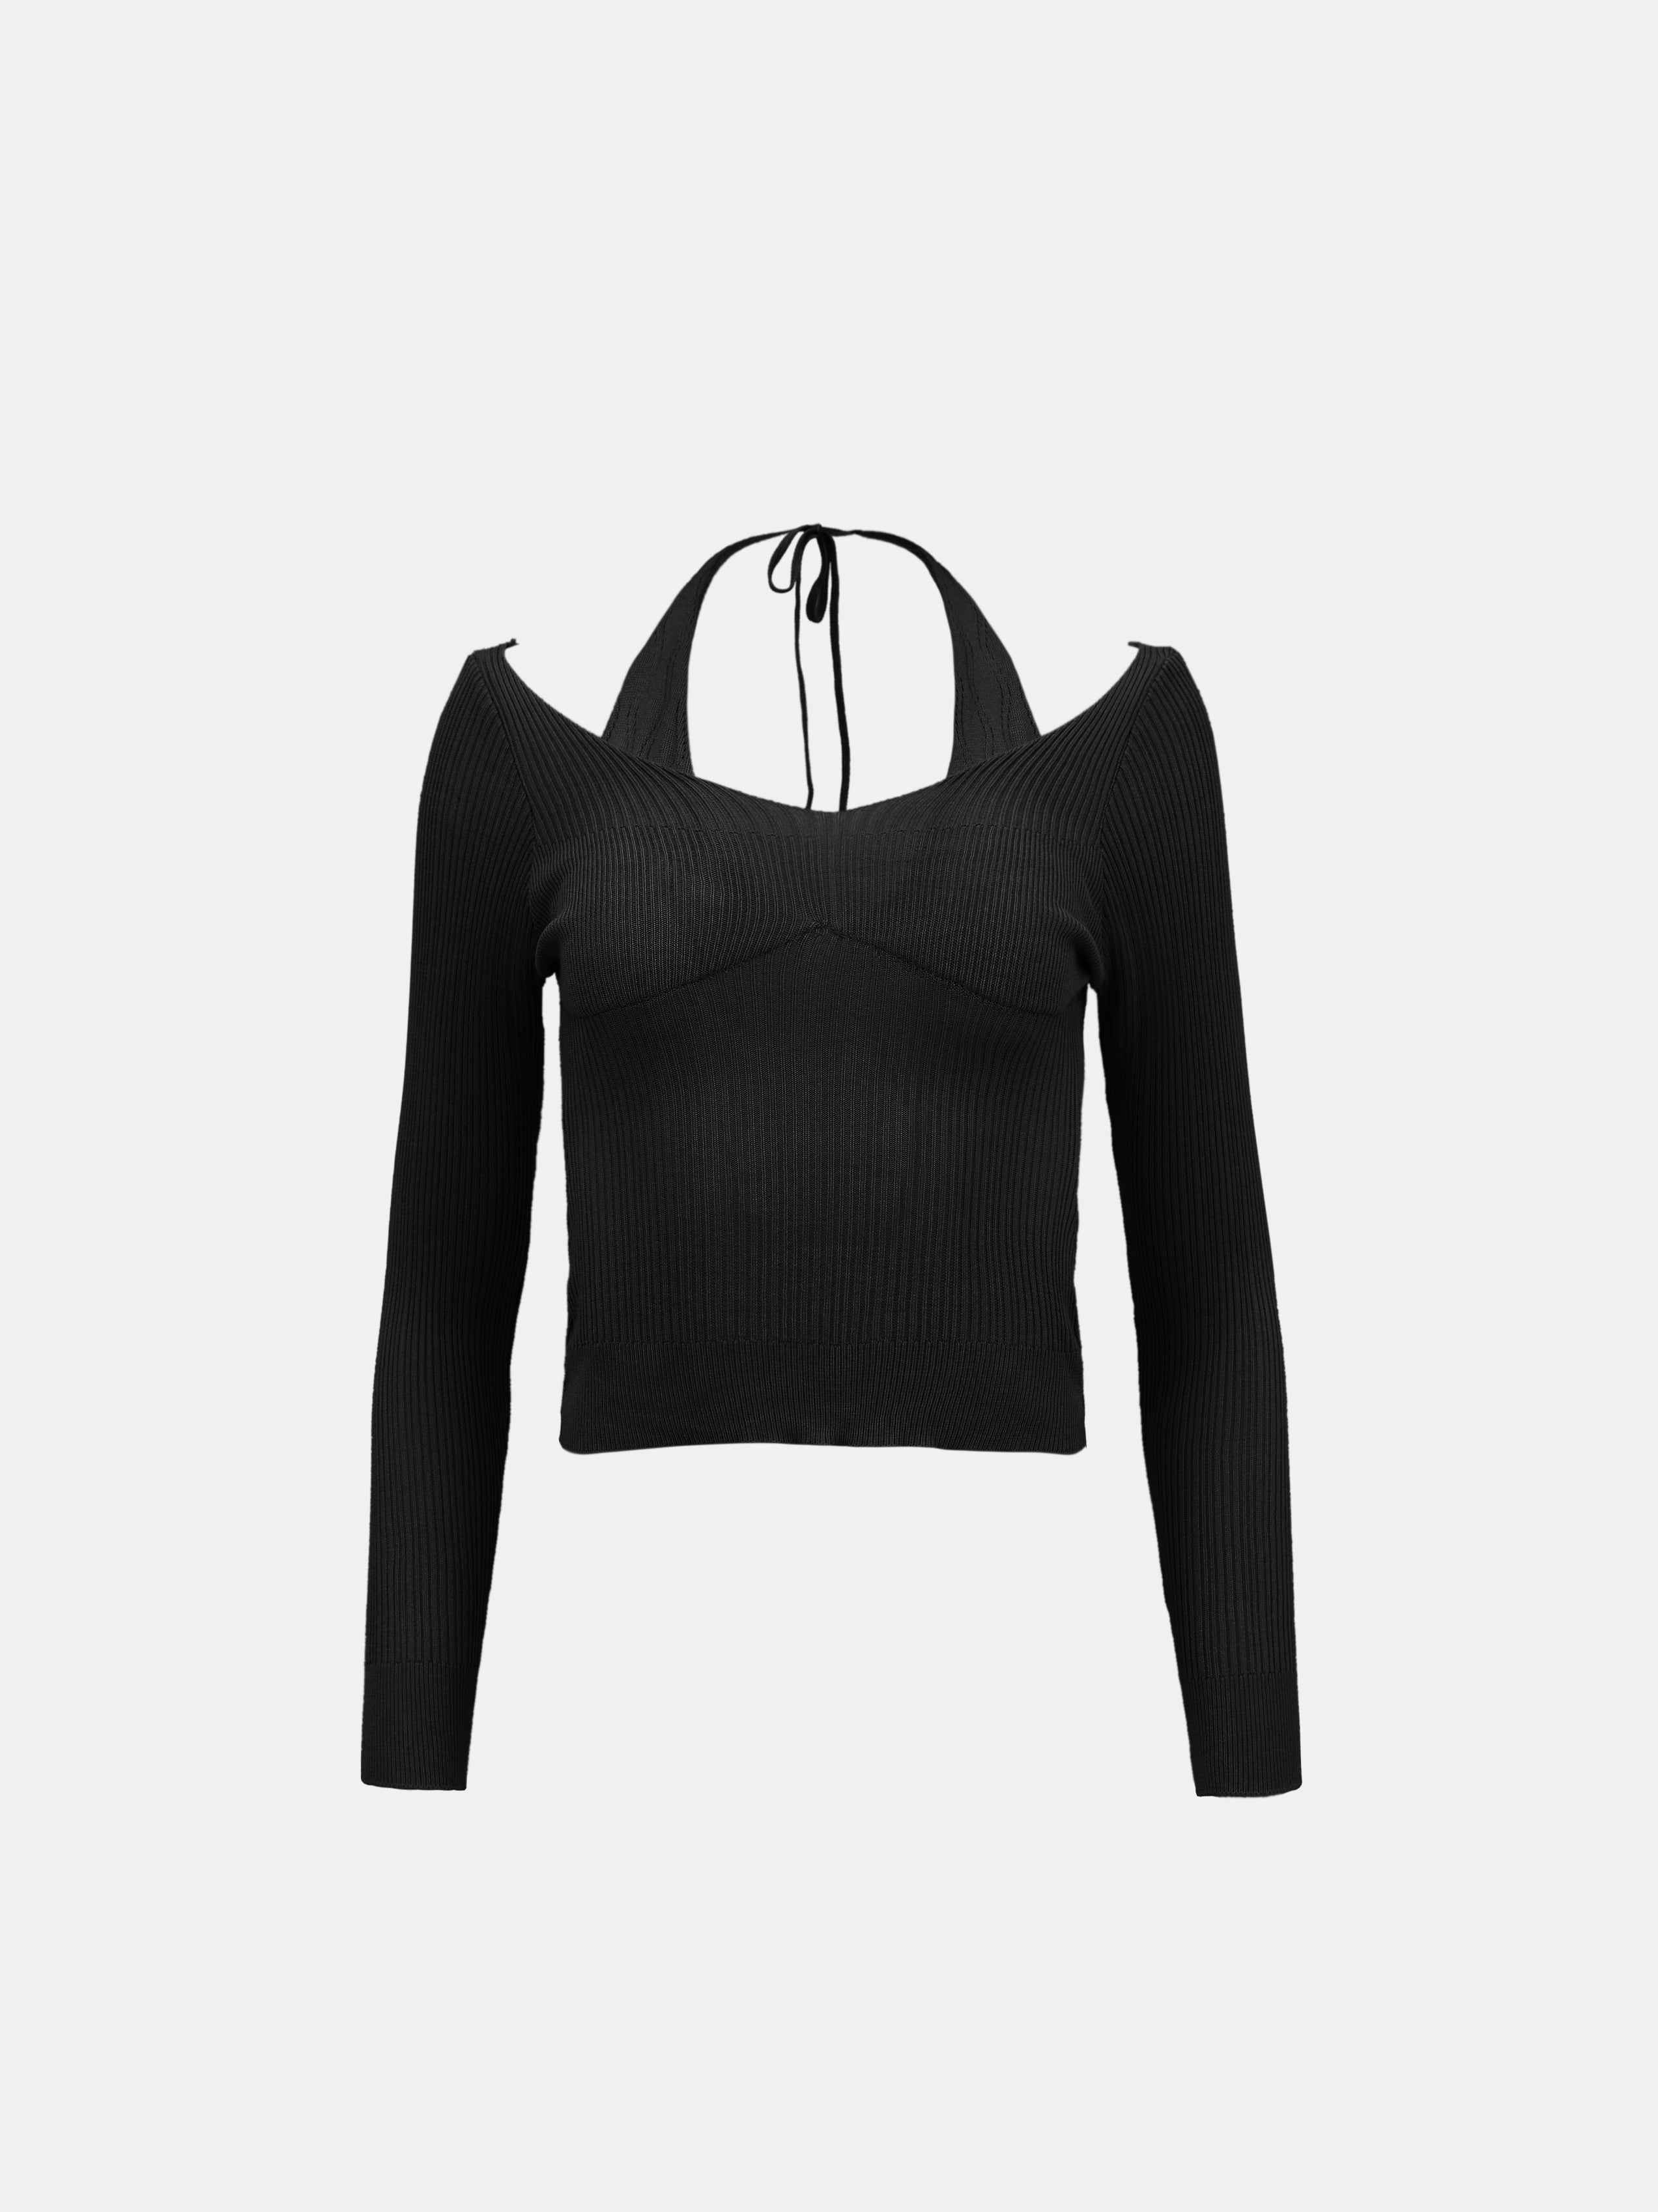 Duo Layered Knit Top, Black